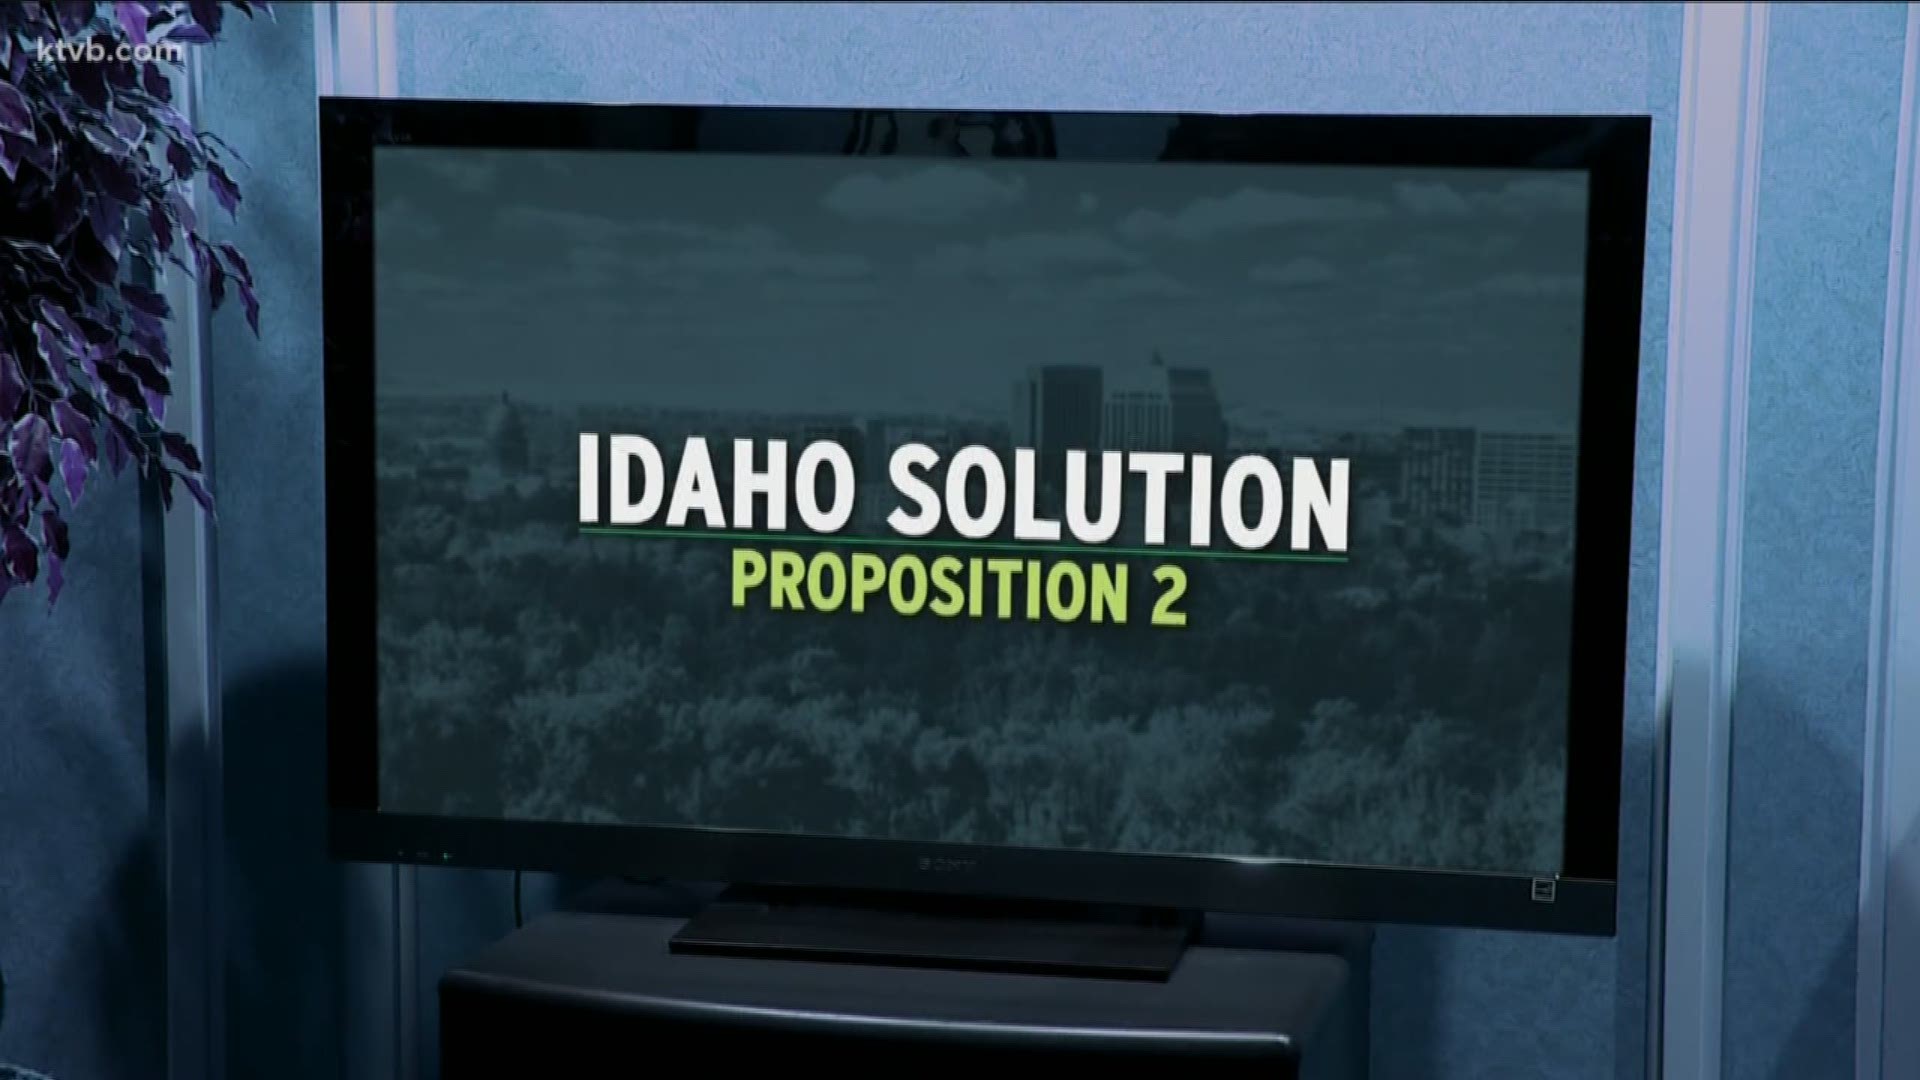 We verified claims made in a new ad in support of Proposition 2.